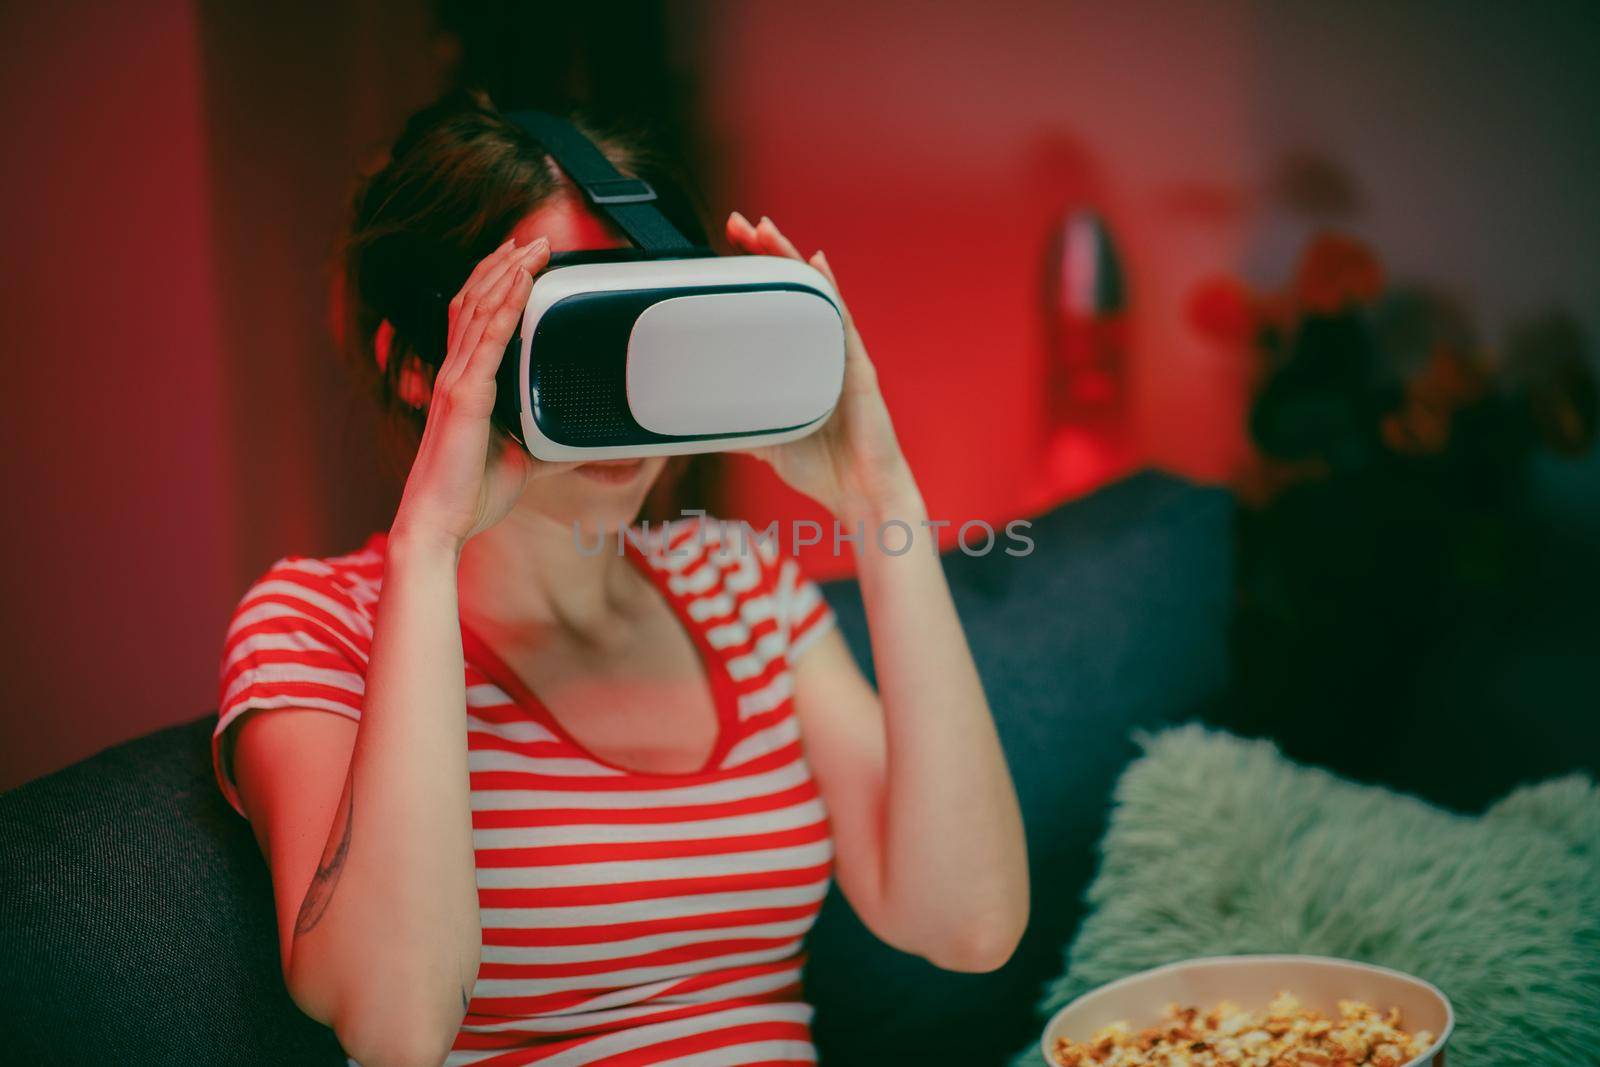 Woman wear VR headset playing video game. Woman relaxing playing video games using vr headset. Caucasian female gamer